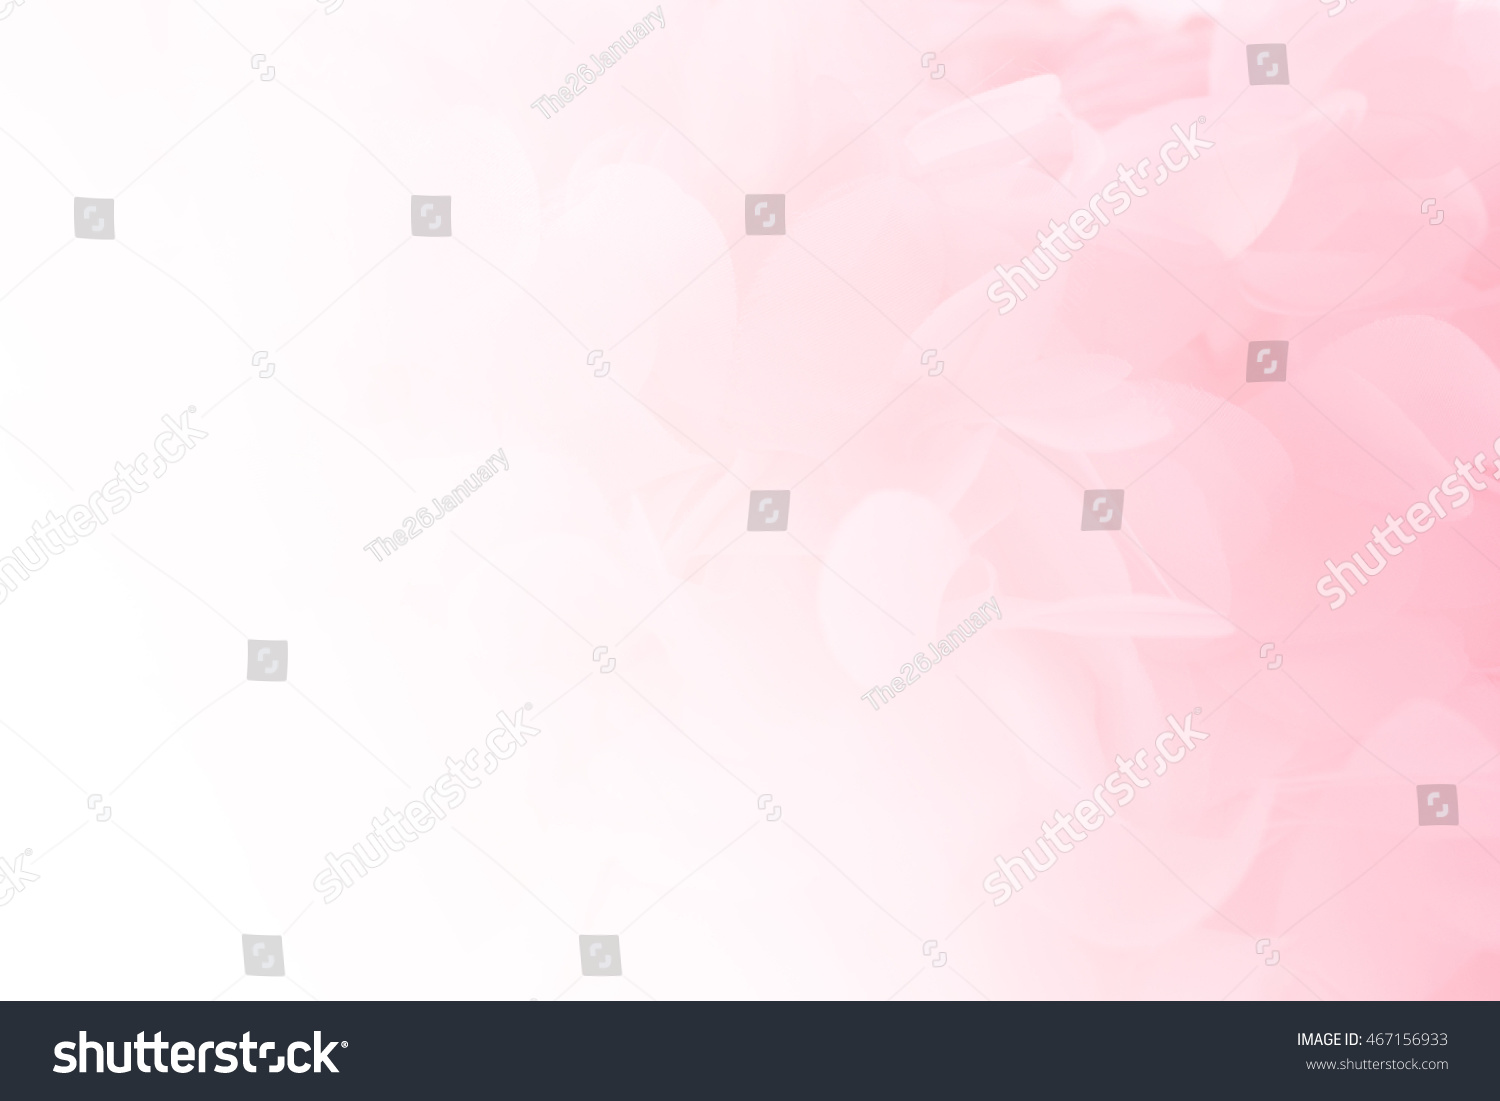 Soft pink pastels background, wedding, anniversary, valentines theme and concept #467156933